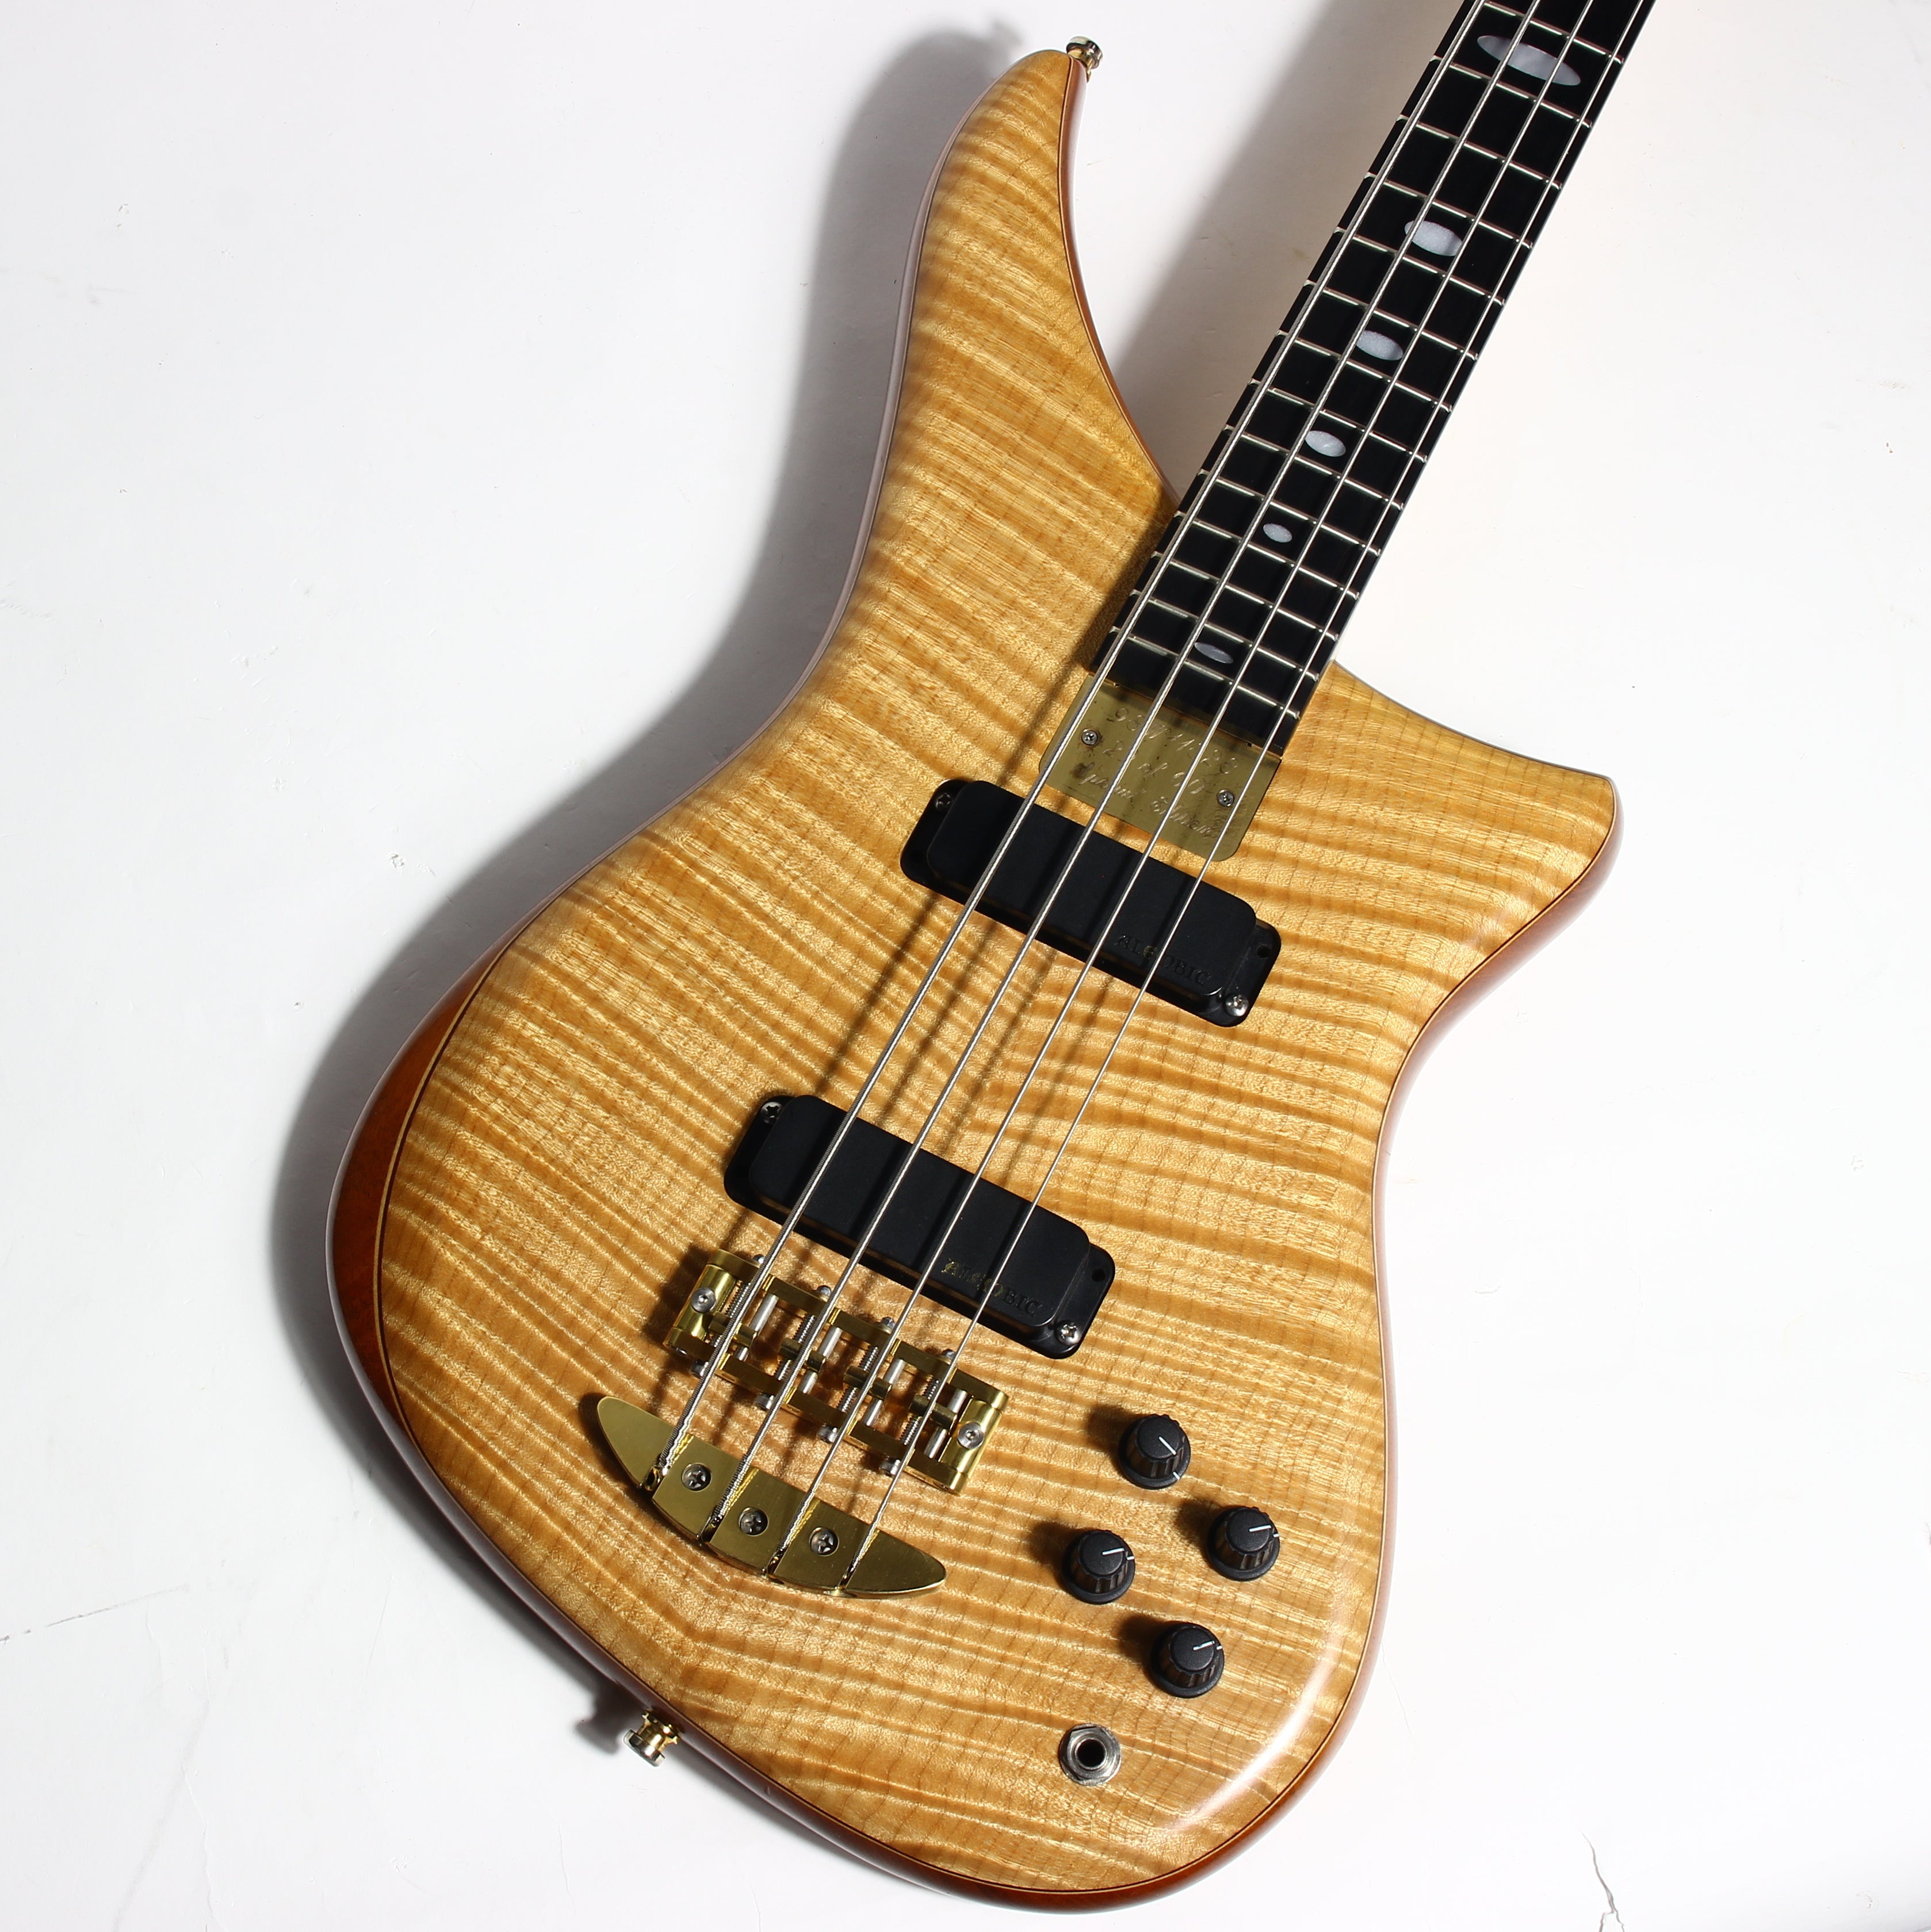 *SOLD*  1998 Alembic Epic Special Limited Edition 4-String Bass - Beautiful Flamed Maple, 60 Made